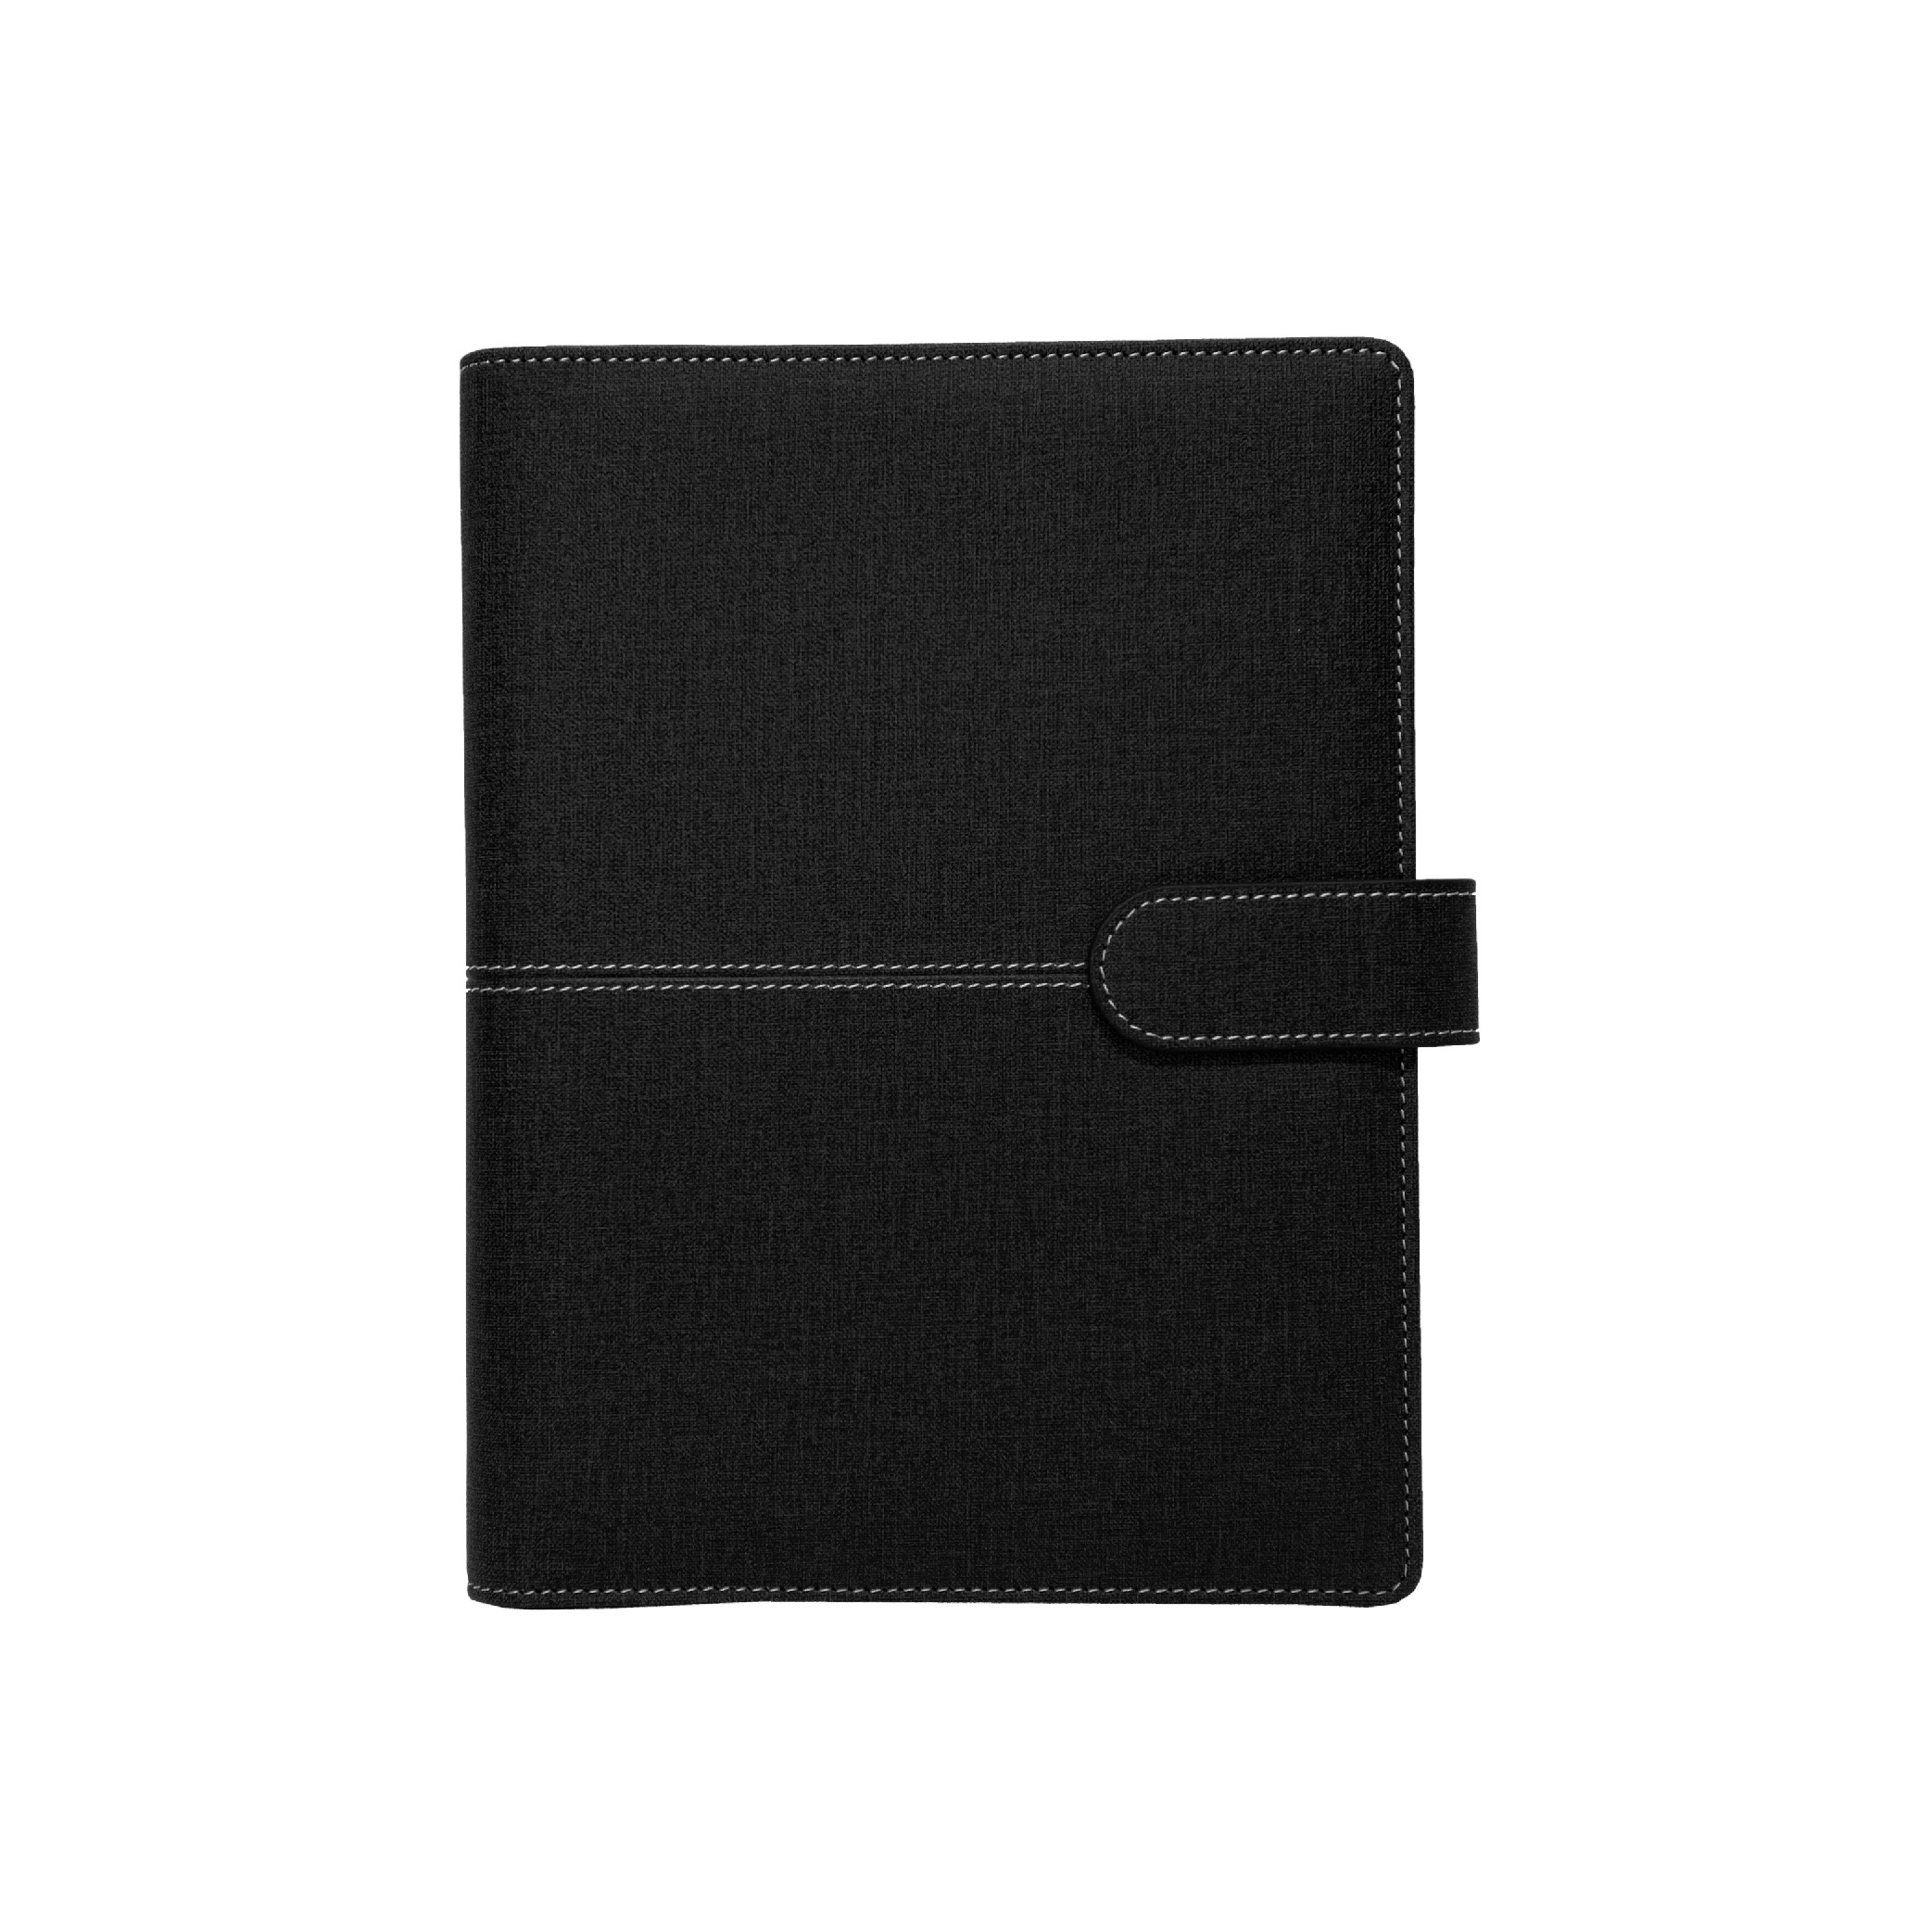 LEATHER PLANNER / NOTEBOOK